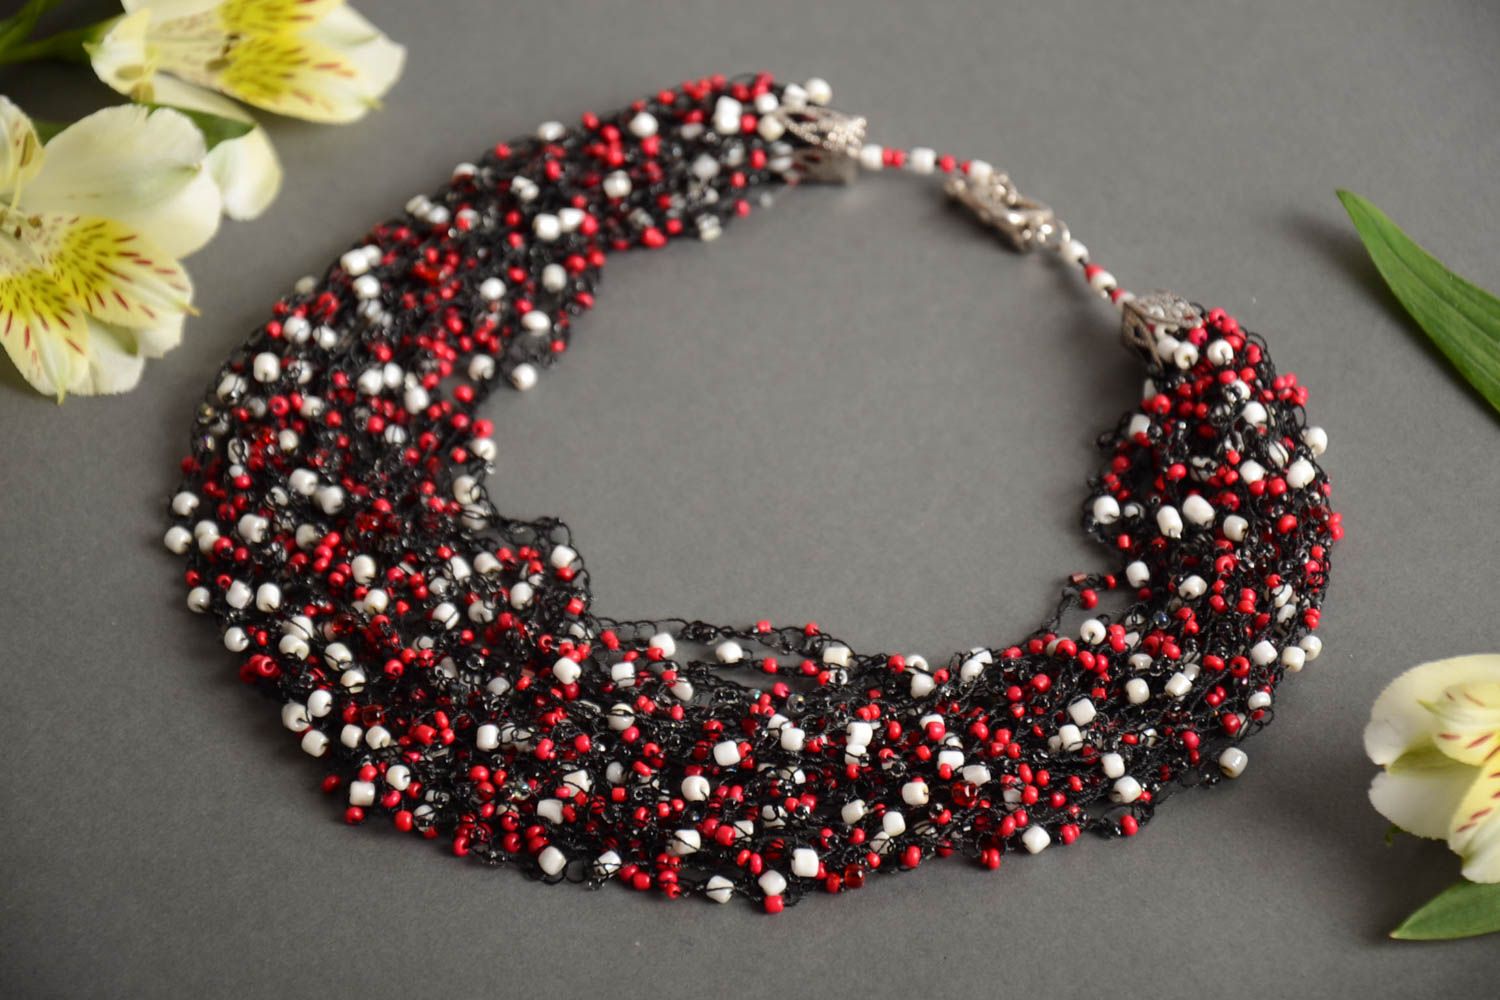 Handmade volume airy necklace crocheted of beads in white red and black colors photo 1